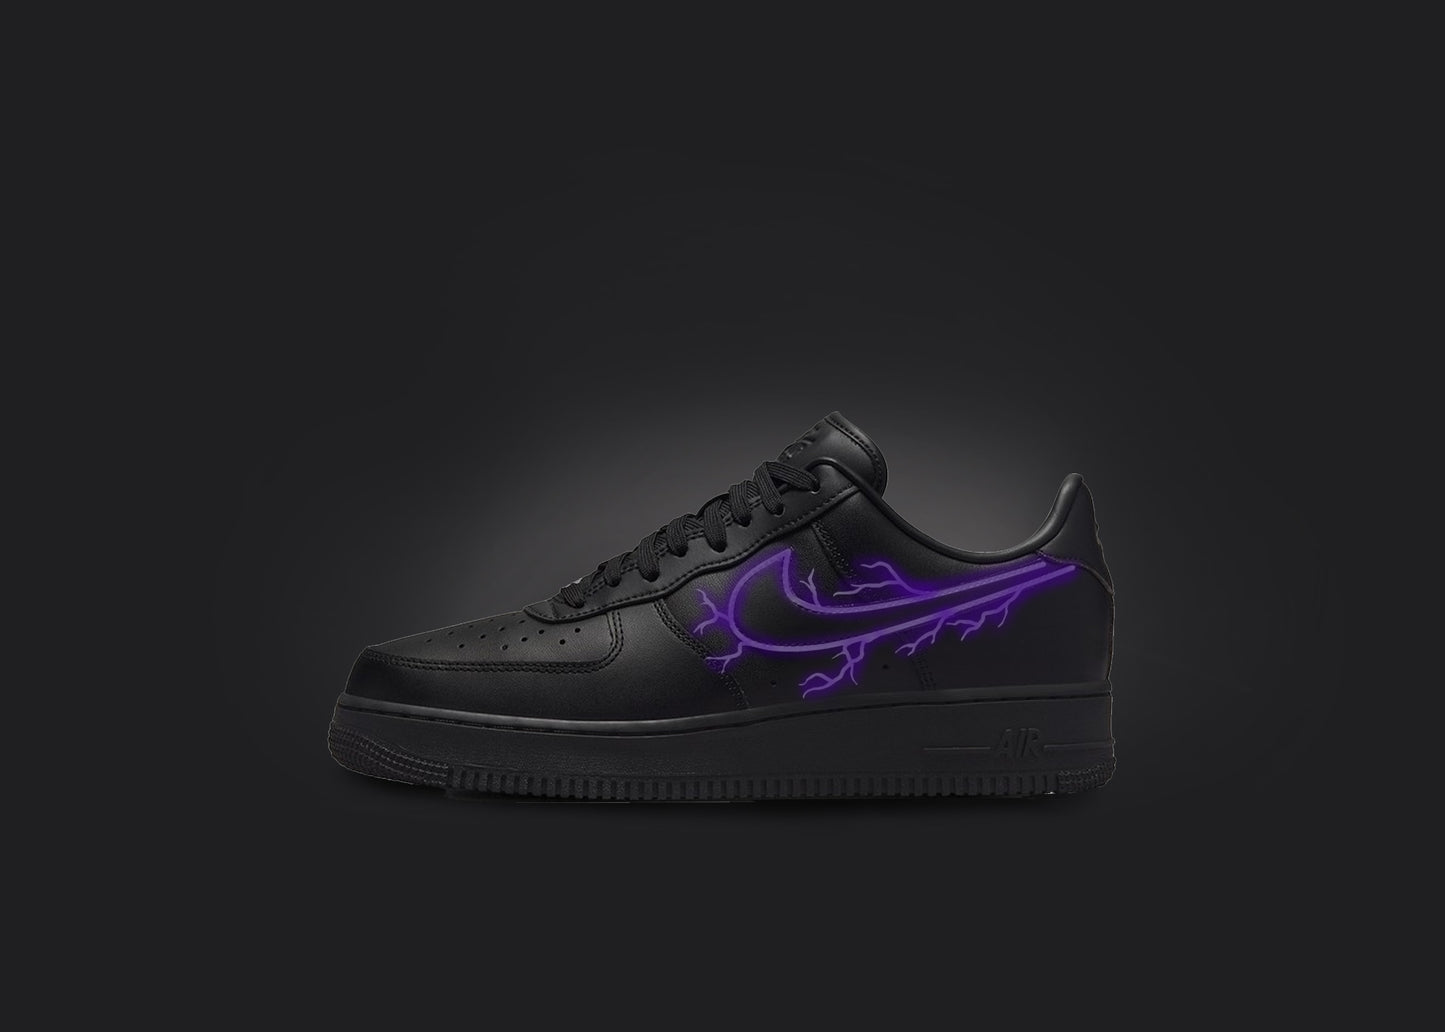 The image is featuring a custom black Air force 1 sneaker on a blank black background. The black nike sneaker has a purple lightning design on the nike logo. 